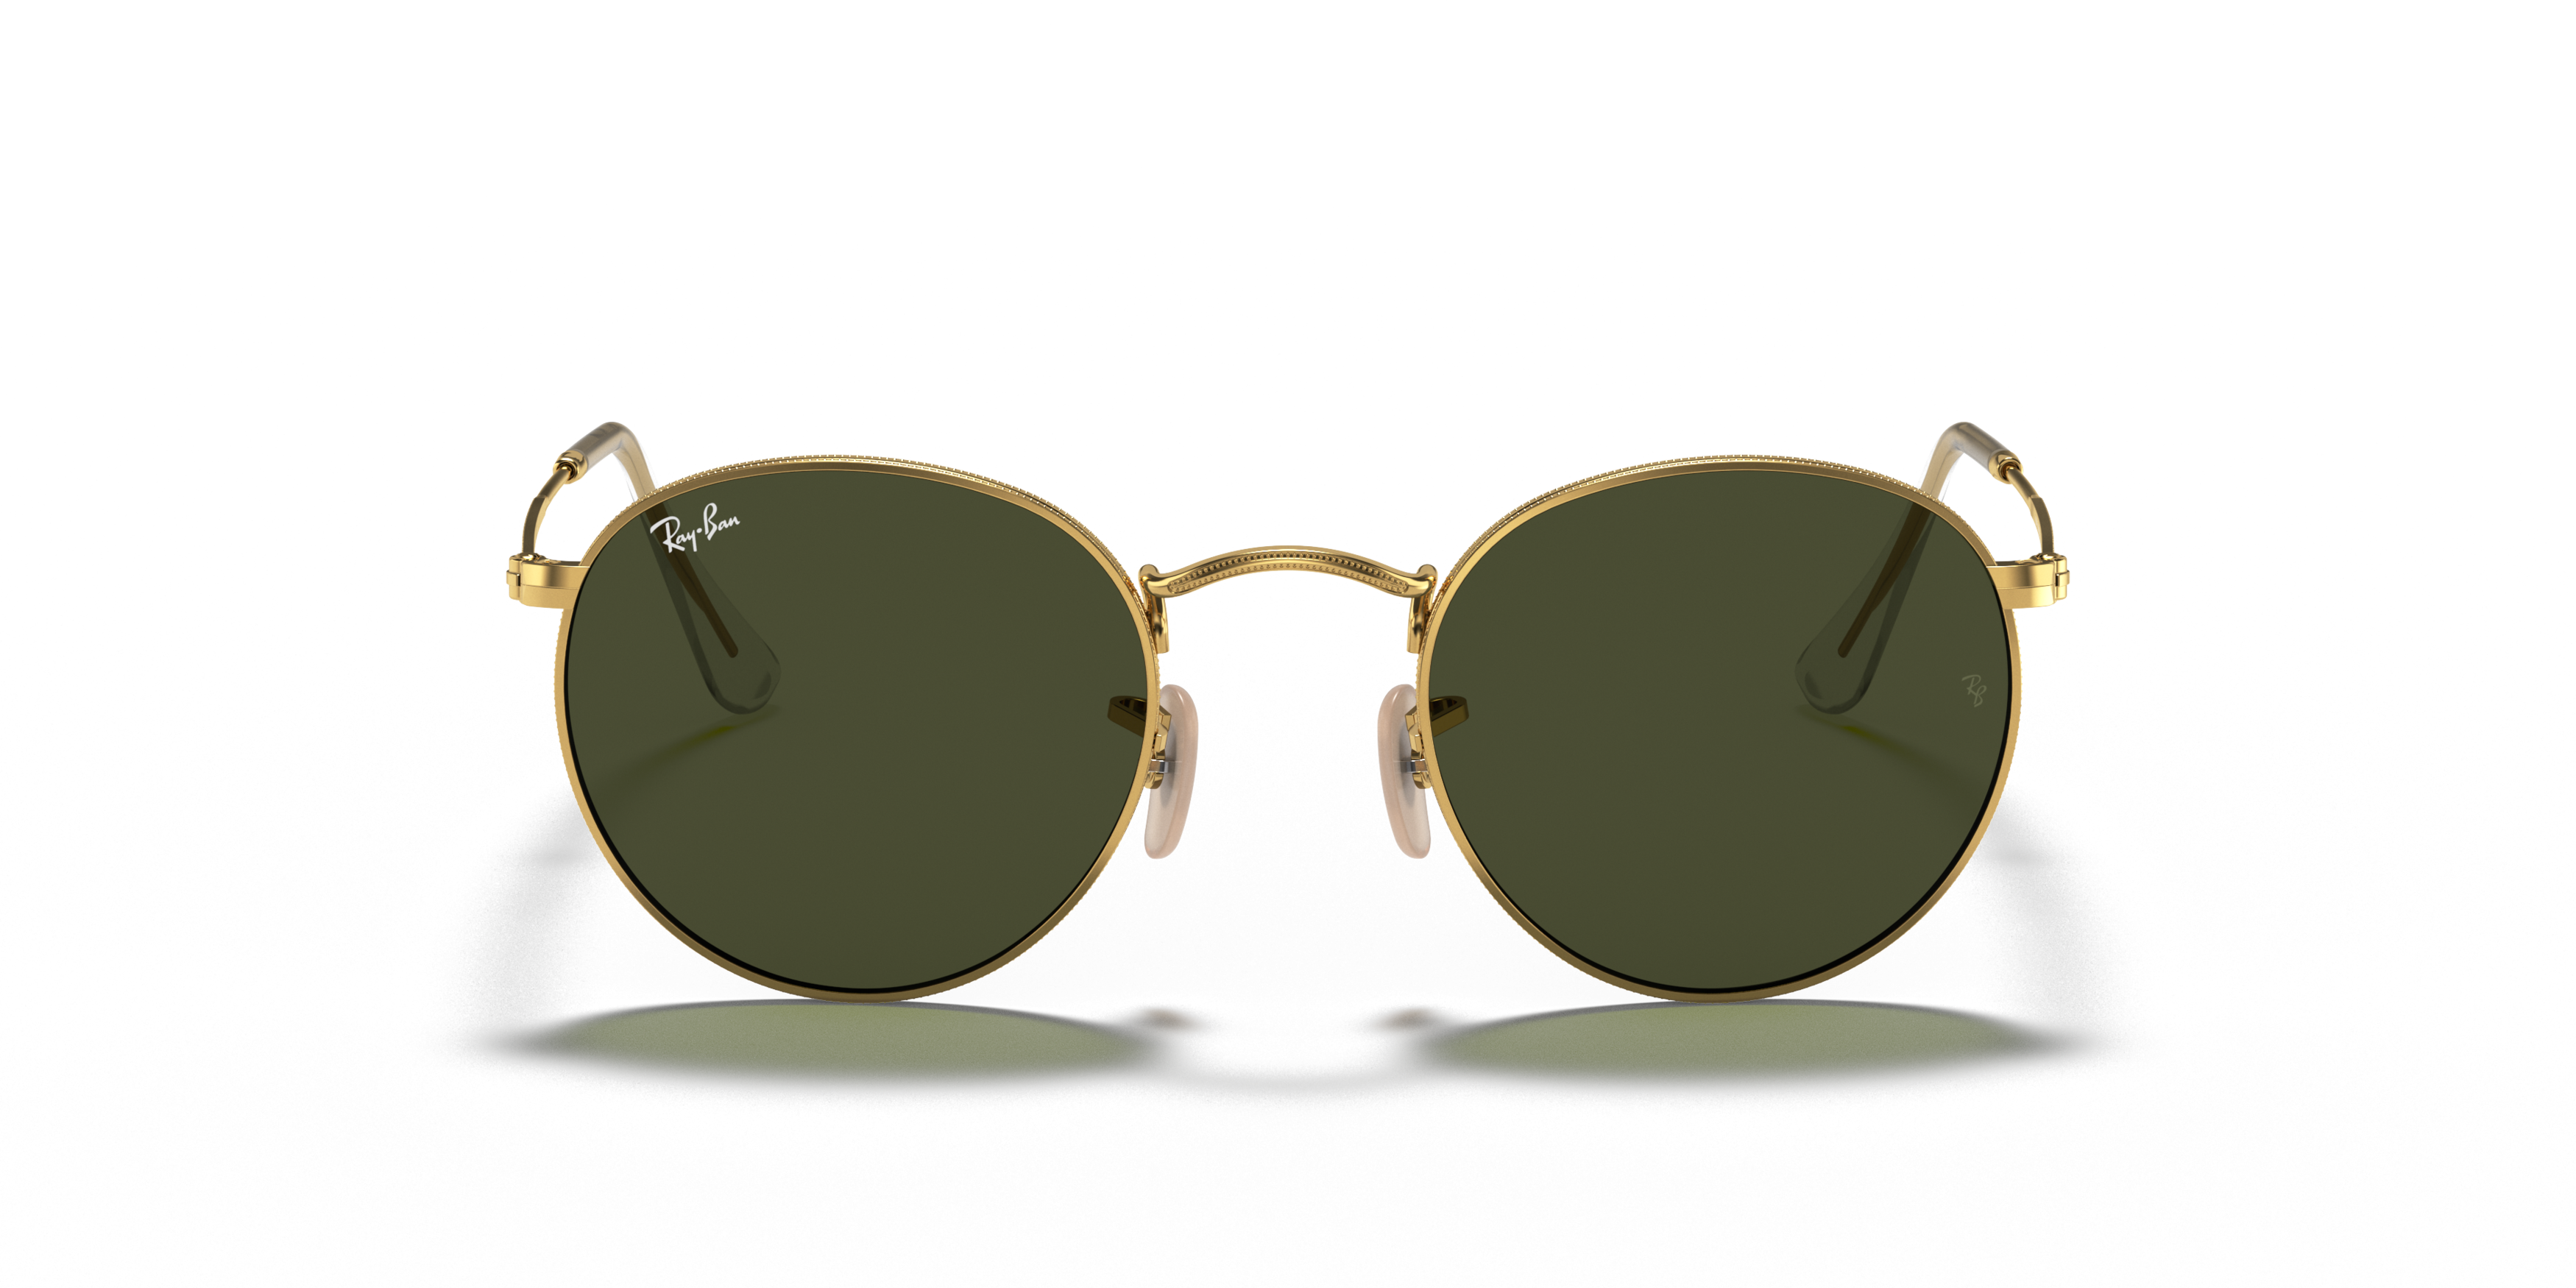 [products.image.front] RAY-BAN RB3447 1